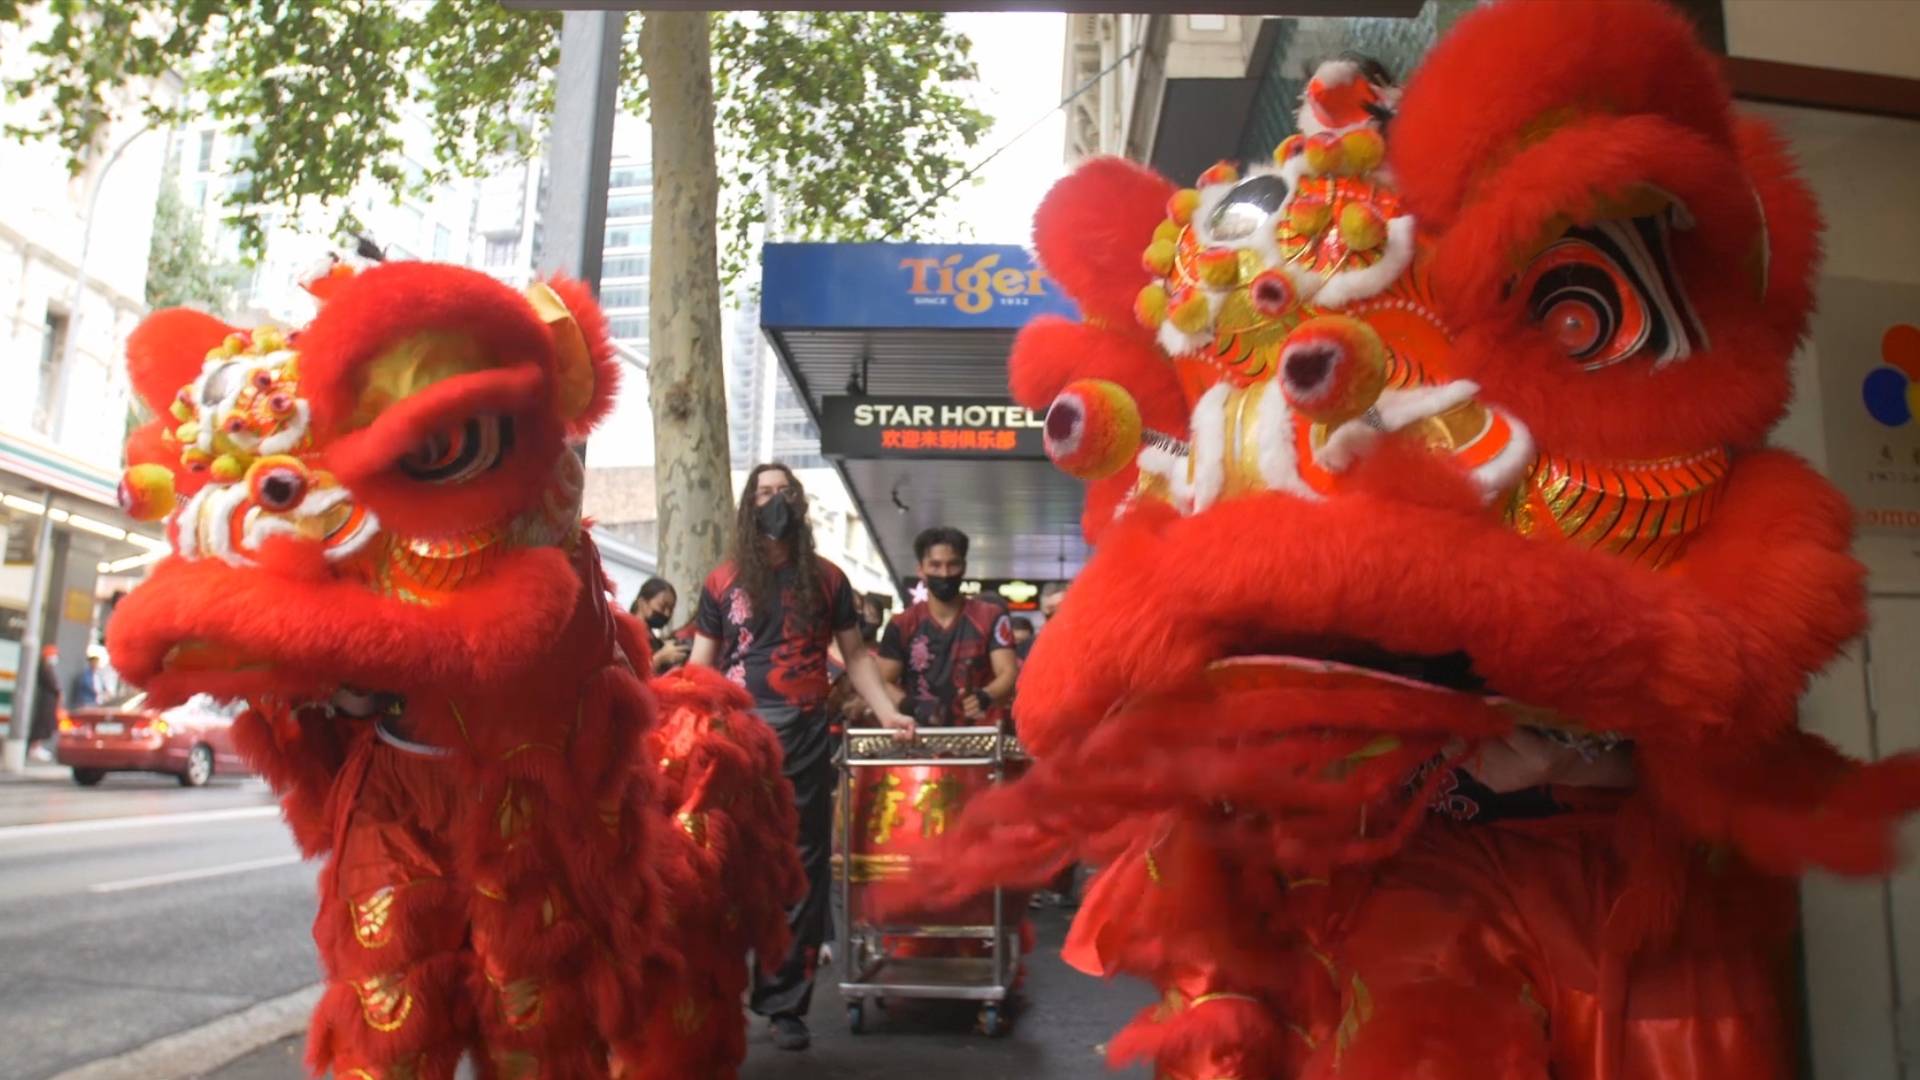 GLOBALink | Australian lion dance player expects Year of Ox to be "a very lucky year"